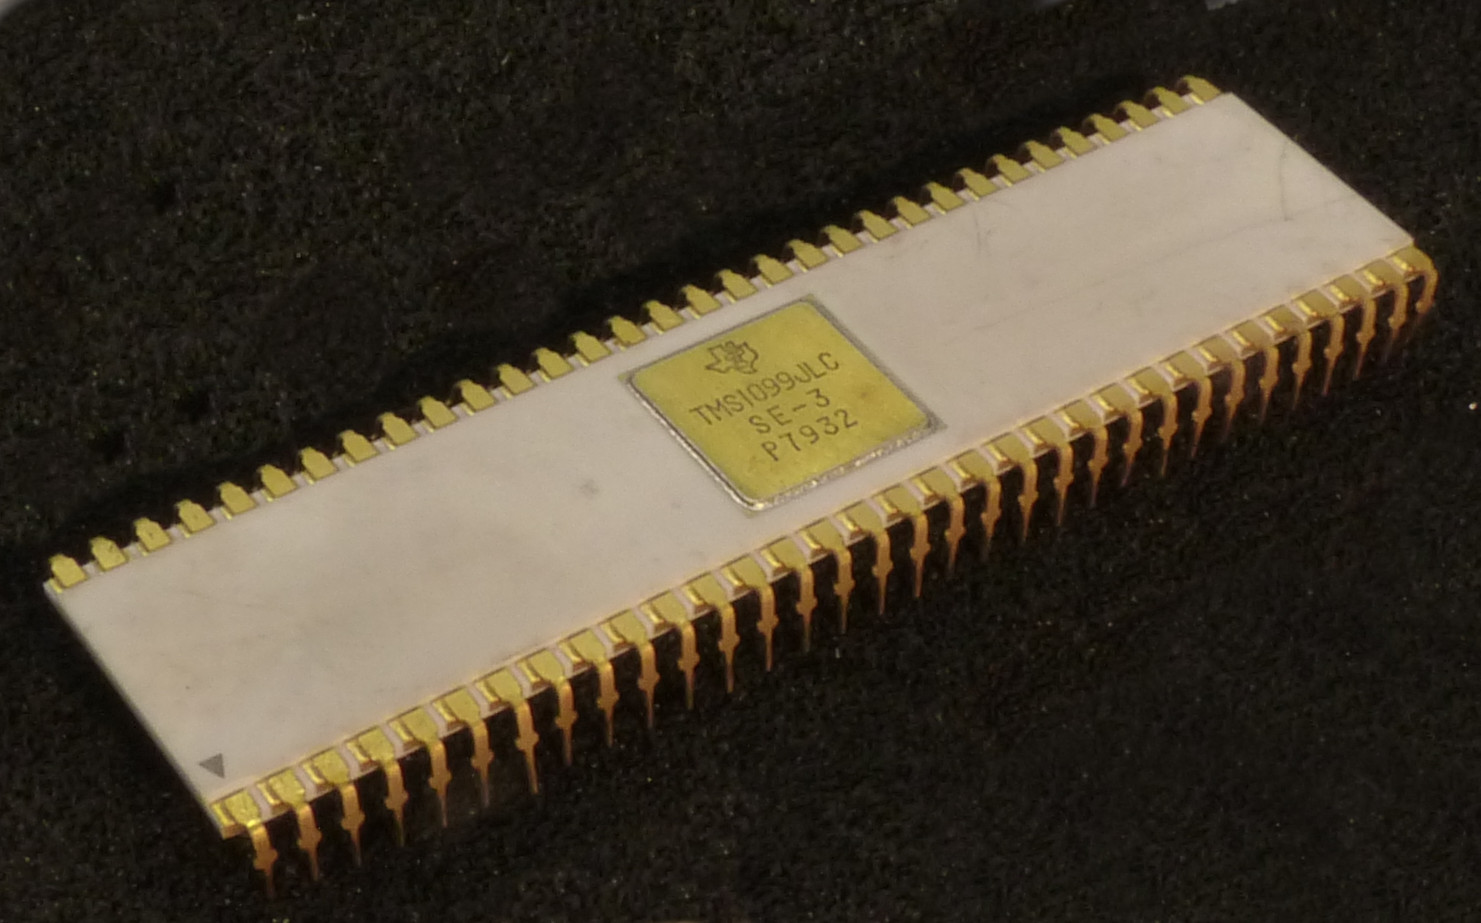 A TMS1099JLC SE-3 64-pin integrated circuit, this is the system emulator device for the TMS1000 CMOS microcomputer.